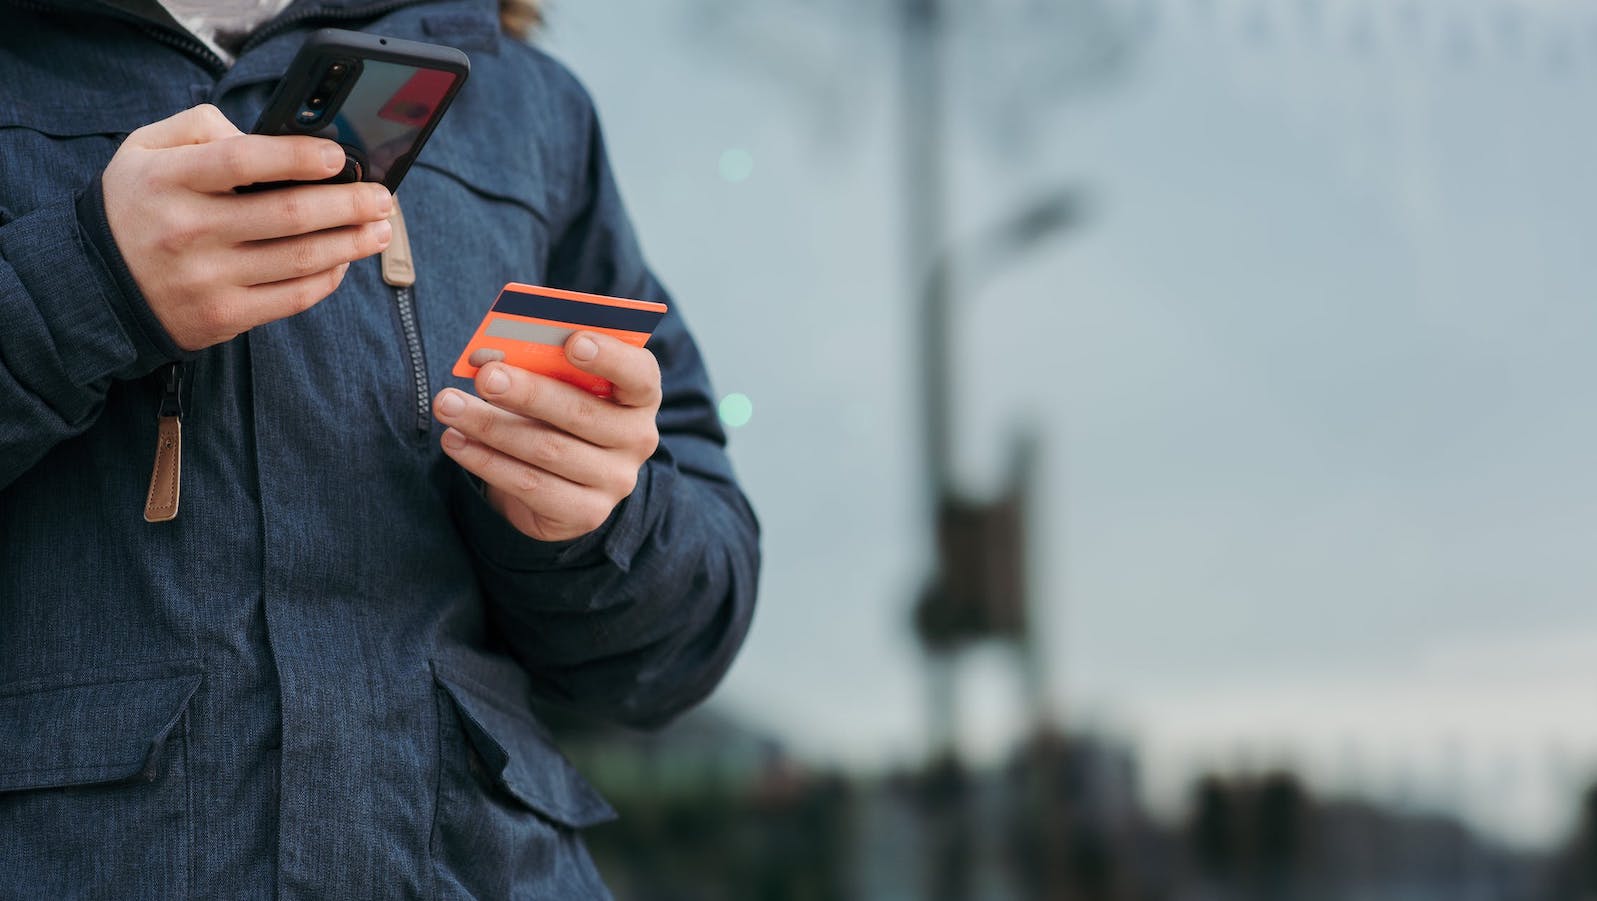 Person in a blue jacket holding a phone and a red credit card set against a blurry background